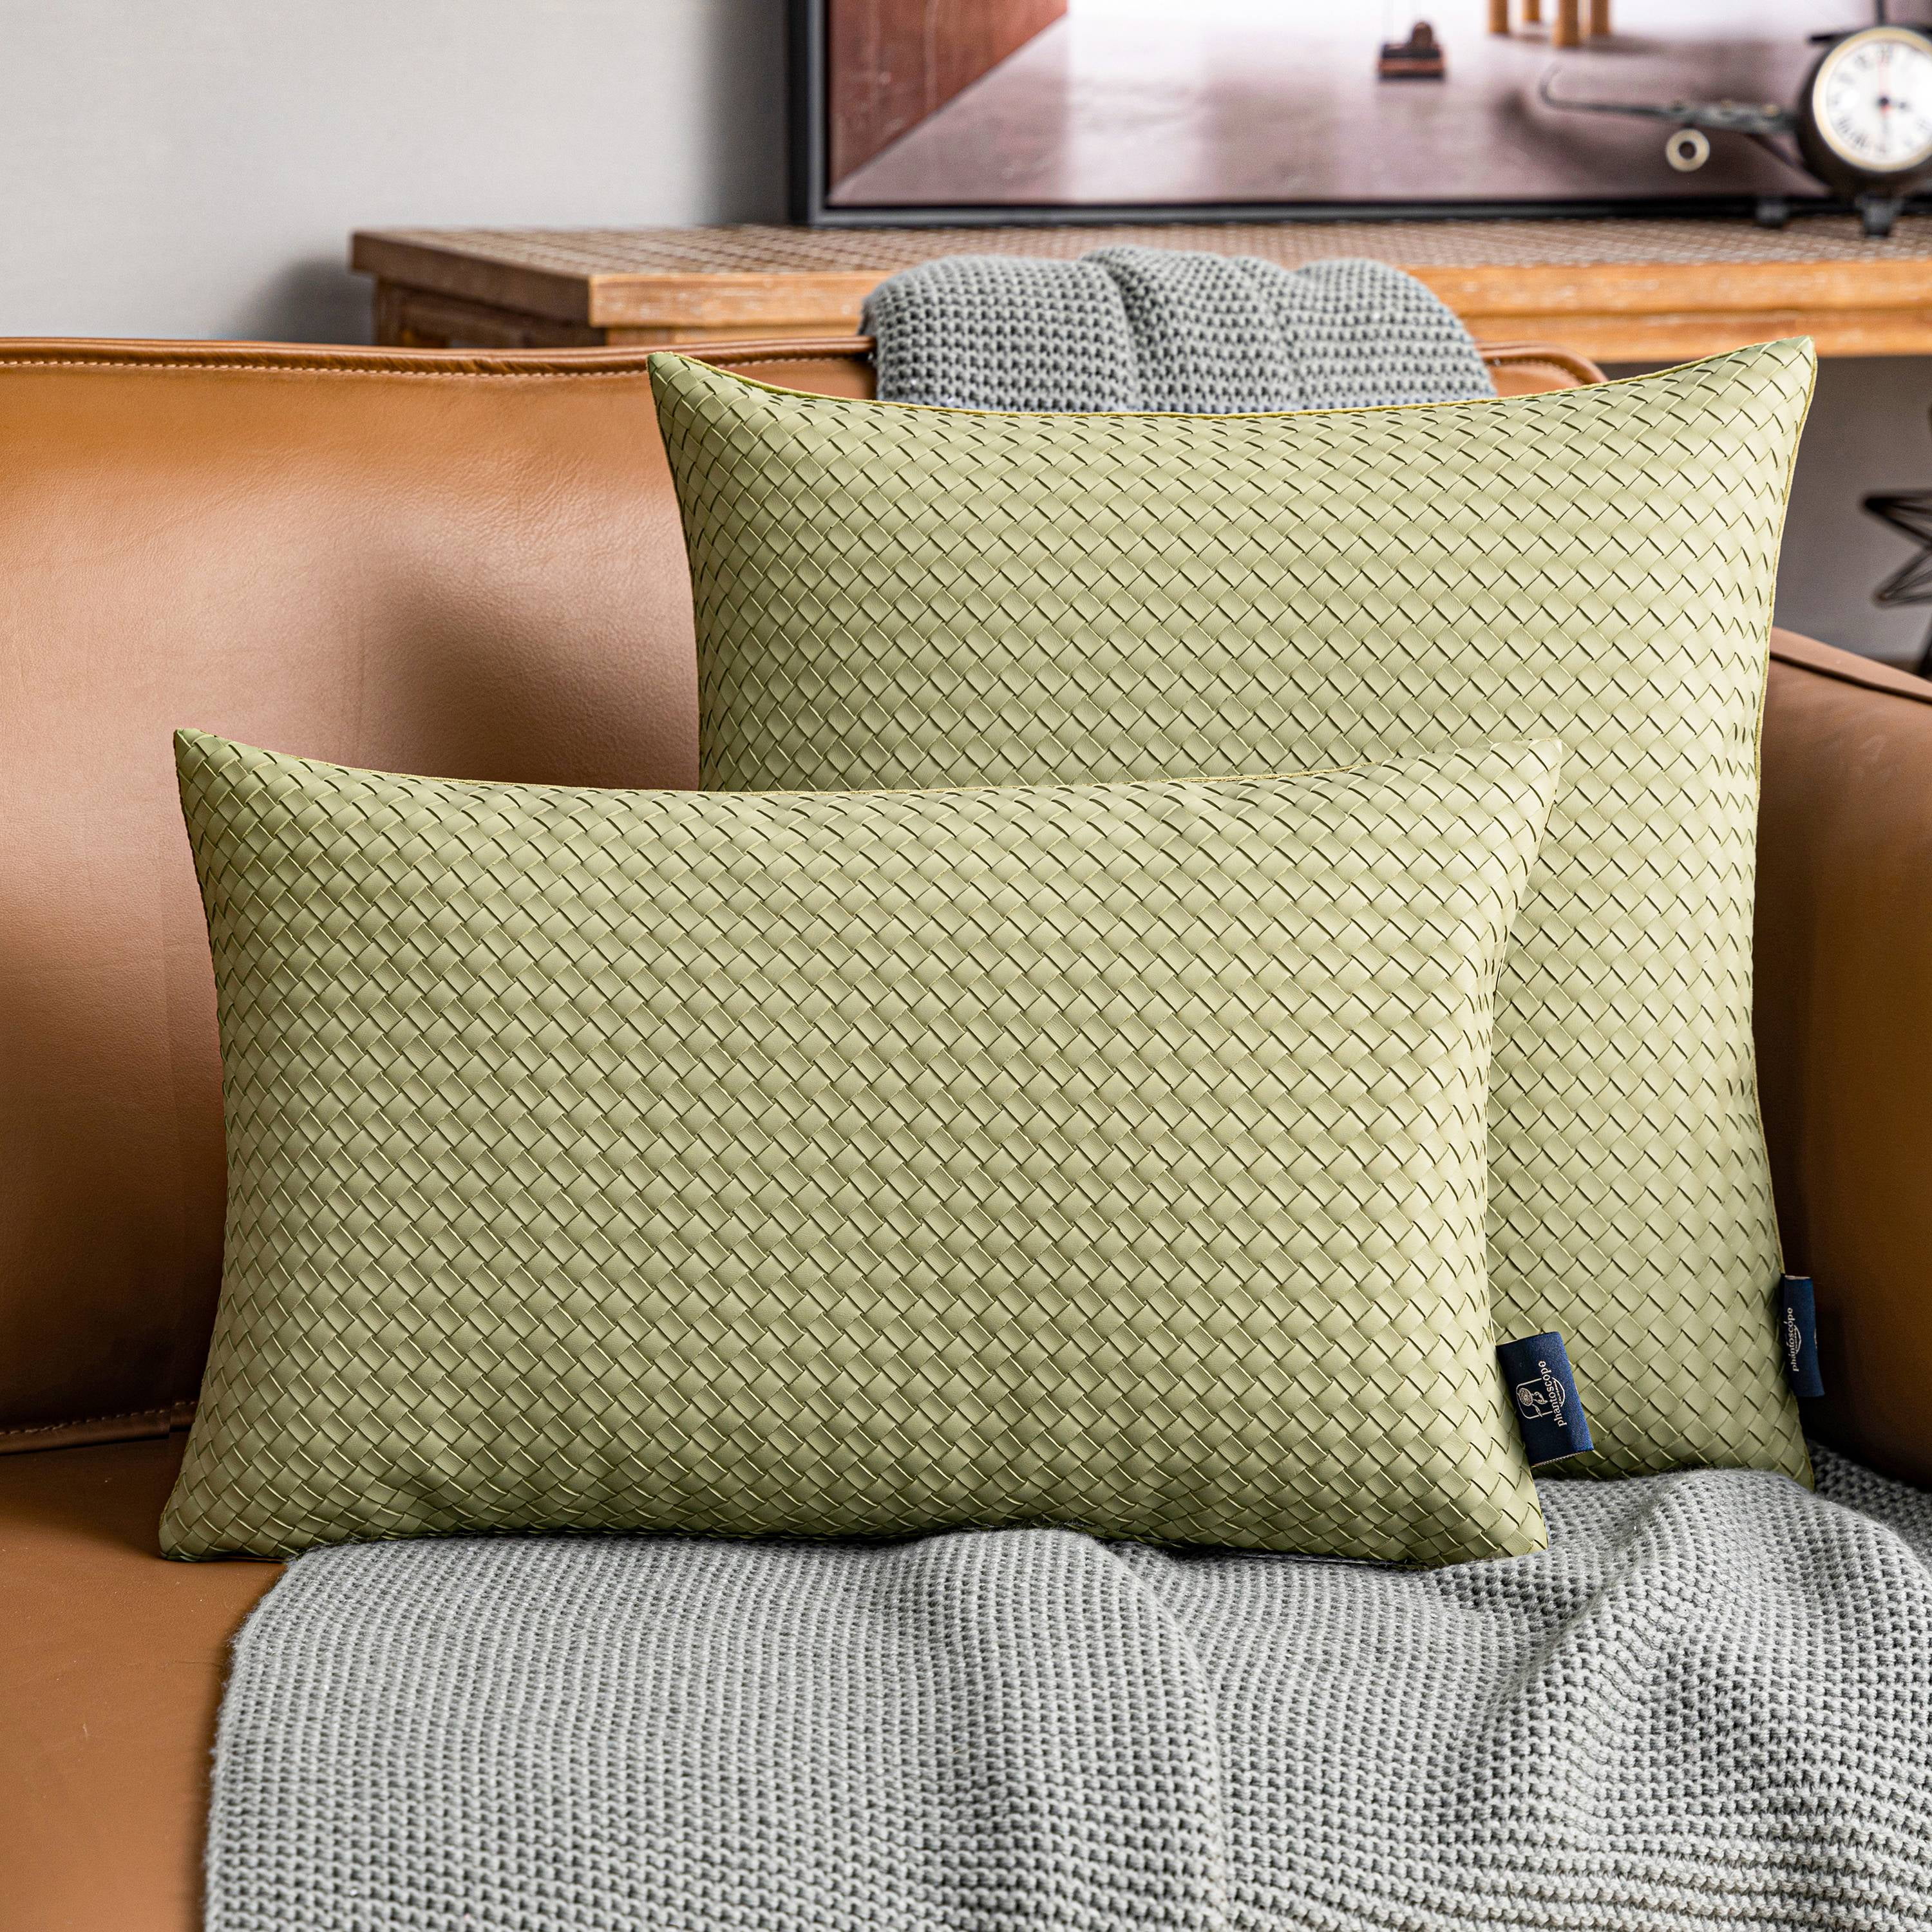 Dropship Throw Pillow Set Of 4, Faux Leather And Cotton Accent Pillows to  Sell Online at a Lower Price